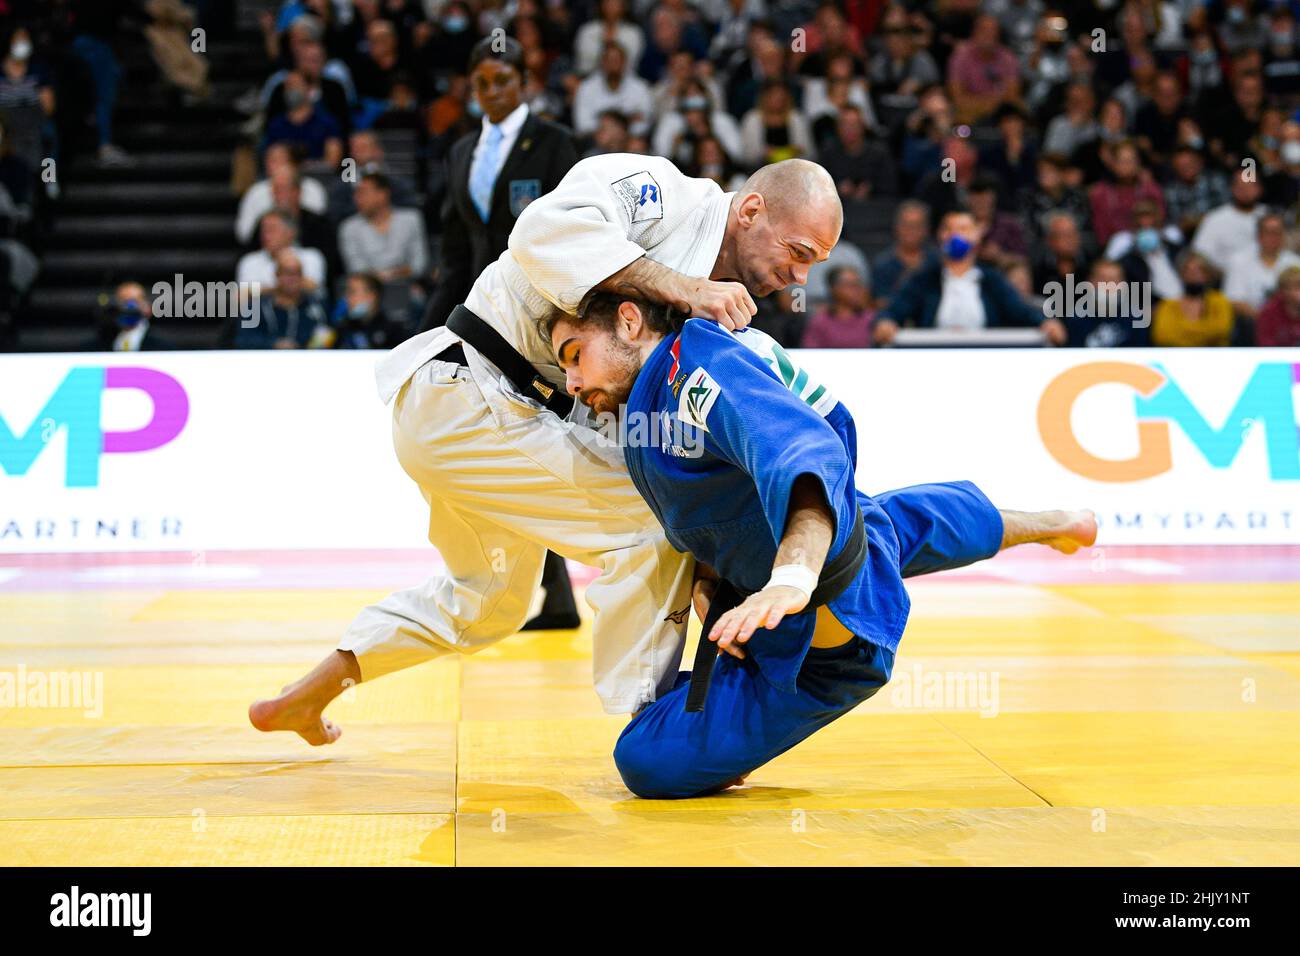 Men -73 kg, Denis IARTCEV (white) of Russia and Theo RIQUIN (blue) of France Silver medal compete during the Paris Grand Slam 2021, Judo event on Octo Stock Photo